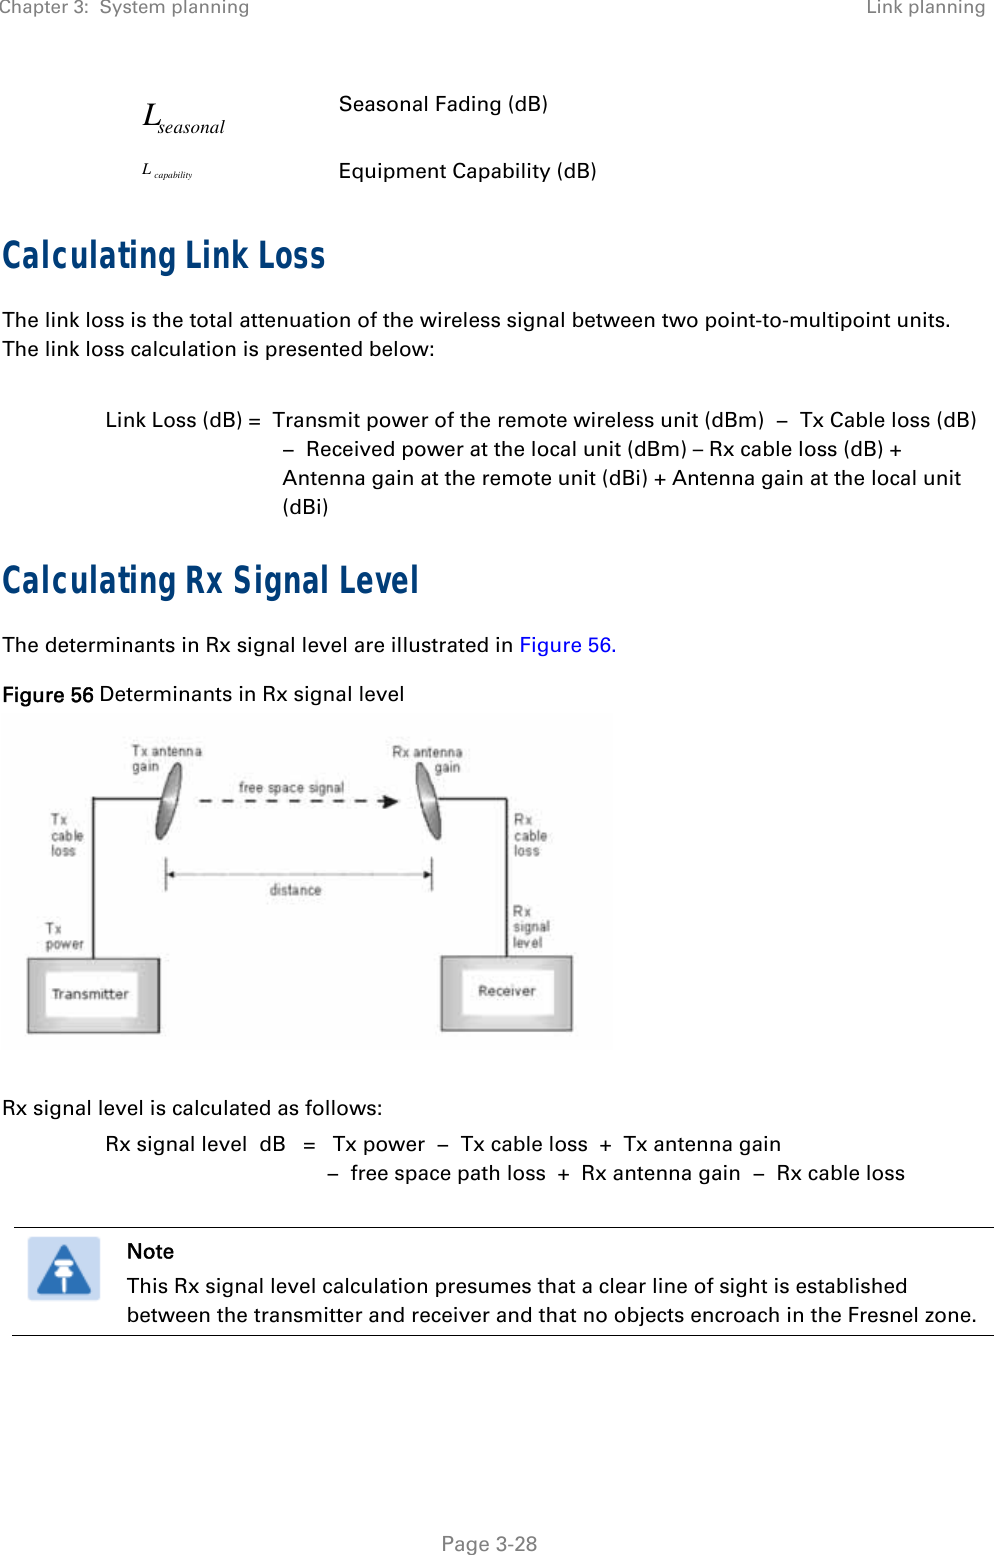 Chapter 3:  System planning  Link planning   Page 3-28 seasonalL Seasonal Fading (dB) capabilityL Equipment Capability (dB) Calculating Link Loss The link loss is the total attenuation of the wireless signal between two point-to-multipoint units. The link loss calculation is presented below:  Link Loss (dB) =  Transmit power of the remote wireless unit (dBm)  −  Tx Cable loss (dB) −  Received power at the local unit (dBm) – Rx cable loss (dB) + Antenna gain at the remote unit (dBi) + Antenna gain at the local unit (dBi) Calculating Rx Signal Level The determinants in Rx signal level are illustrated in Figure 56. Figure 56 Determinants in Rx signal level   Rx signal level is calculated as follows: Rx signal level  dB   =   Tx power  −  Tx cable loss  +  Tx antenna gain   −  free space path loss  +  Rx antenna gain  −  Rx cable loss   Note This Rx signal level calculation presumes that a clear line of sight is established between the transmitter and receiver and that no objects encroach in the Fresnel zone.  